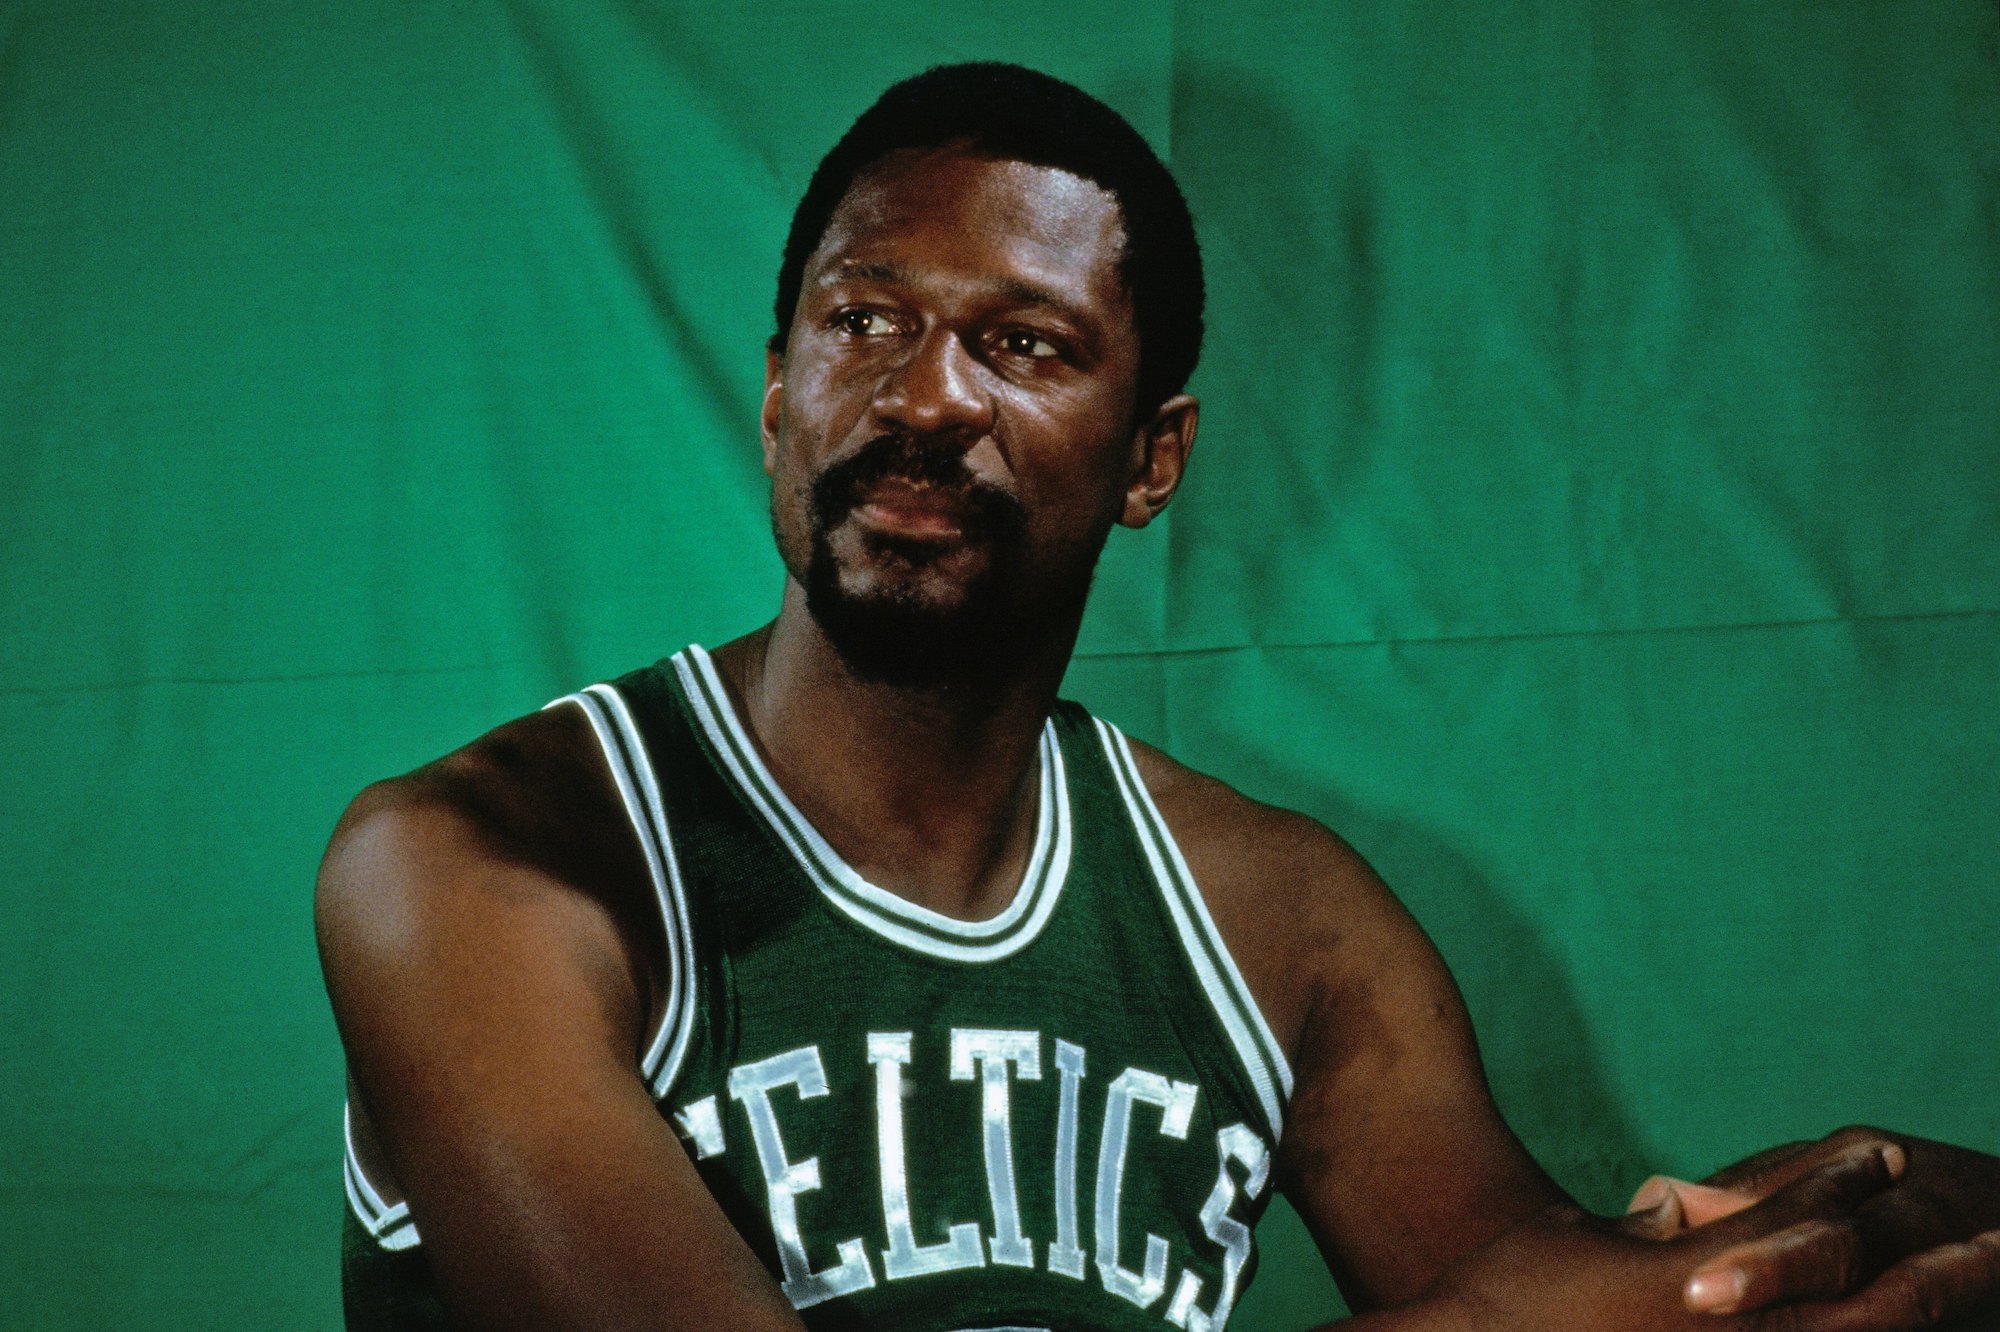 BOSTON - 1969: Bill Russell #6 of the Boston Celtics poses for a portrait in 1969 at the Boston Garden in Boston, Massachusetts. NOTE TO USER: User expressly acknowledges and agrees that, by downloading and or using this photograph, User is consenting to the terms and conditions of the Getty Images License Agreement. Mandatory Copyright Notice: Copyright 1969 NBAE (Photo by Dick Raphael/NBAE via Getty Images)